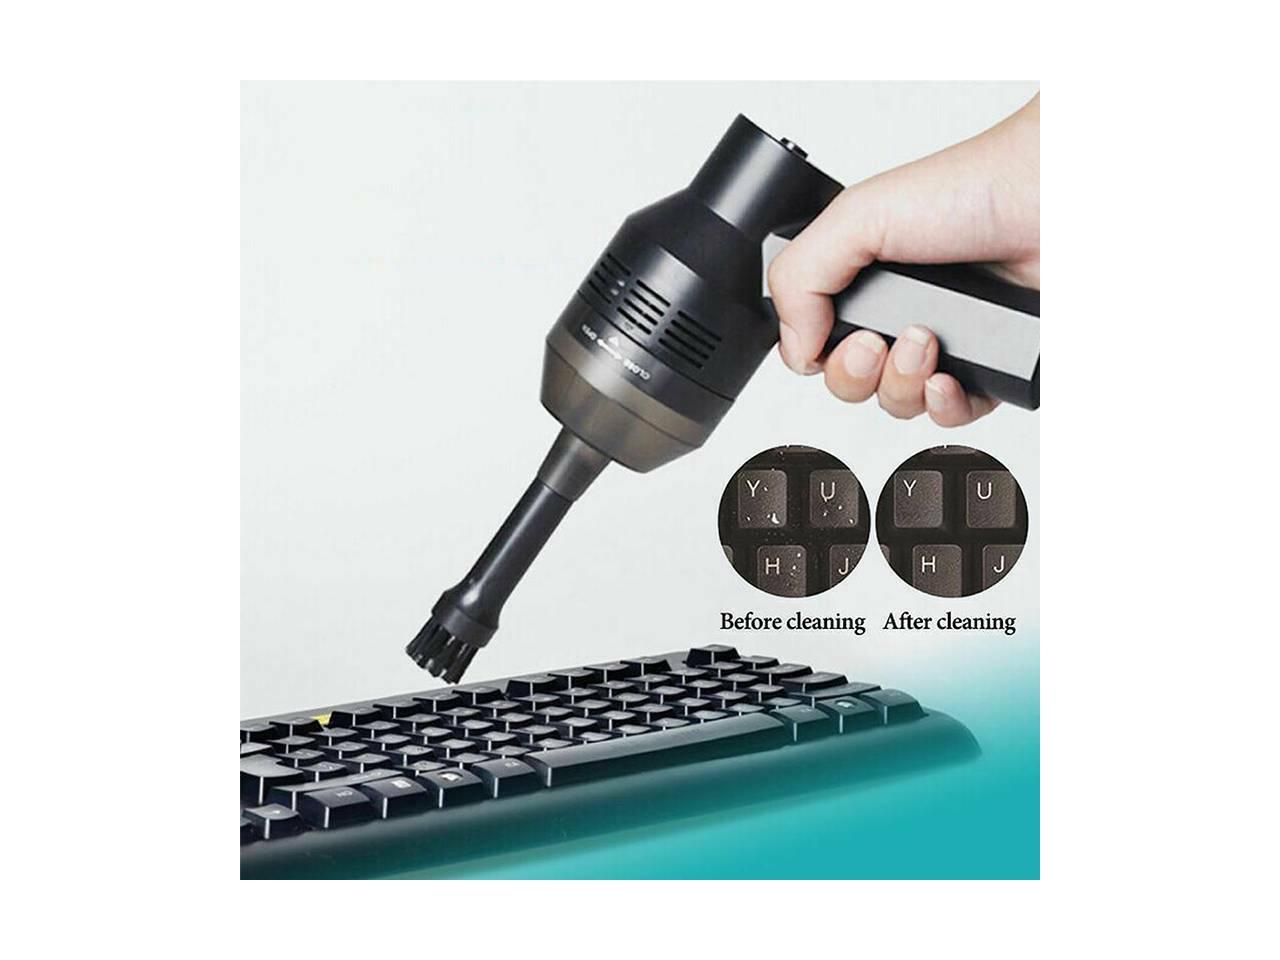 Desktop Vacuum Cleaner Mini USB Charge Adjustable Strong Suction Power Recharging Computer Keyboard Cleaning Table Dust Sweeper Counter Crumb Portable Office Kitchen Energy Saving Green 